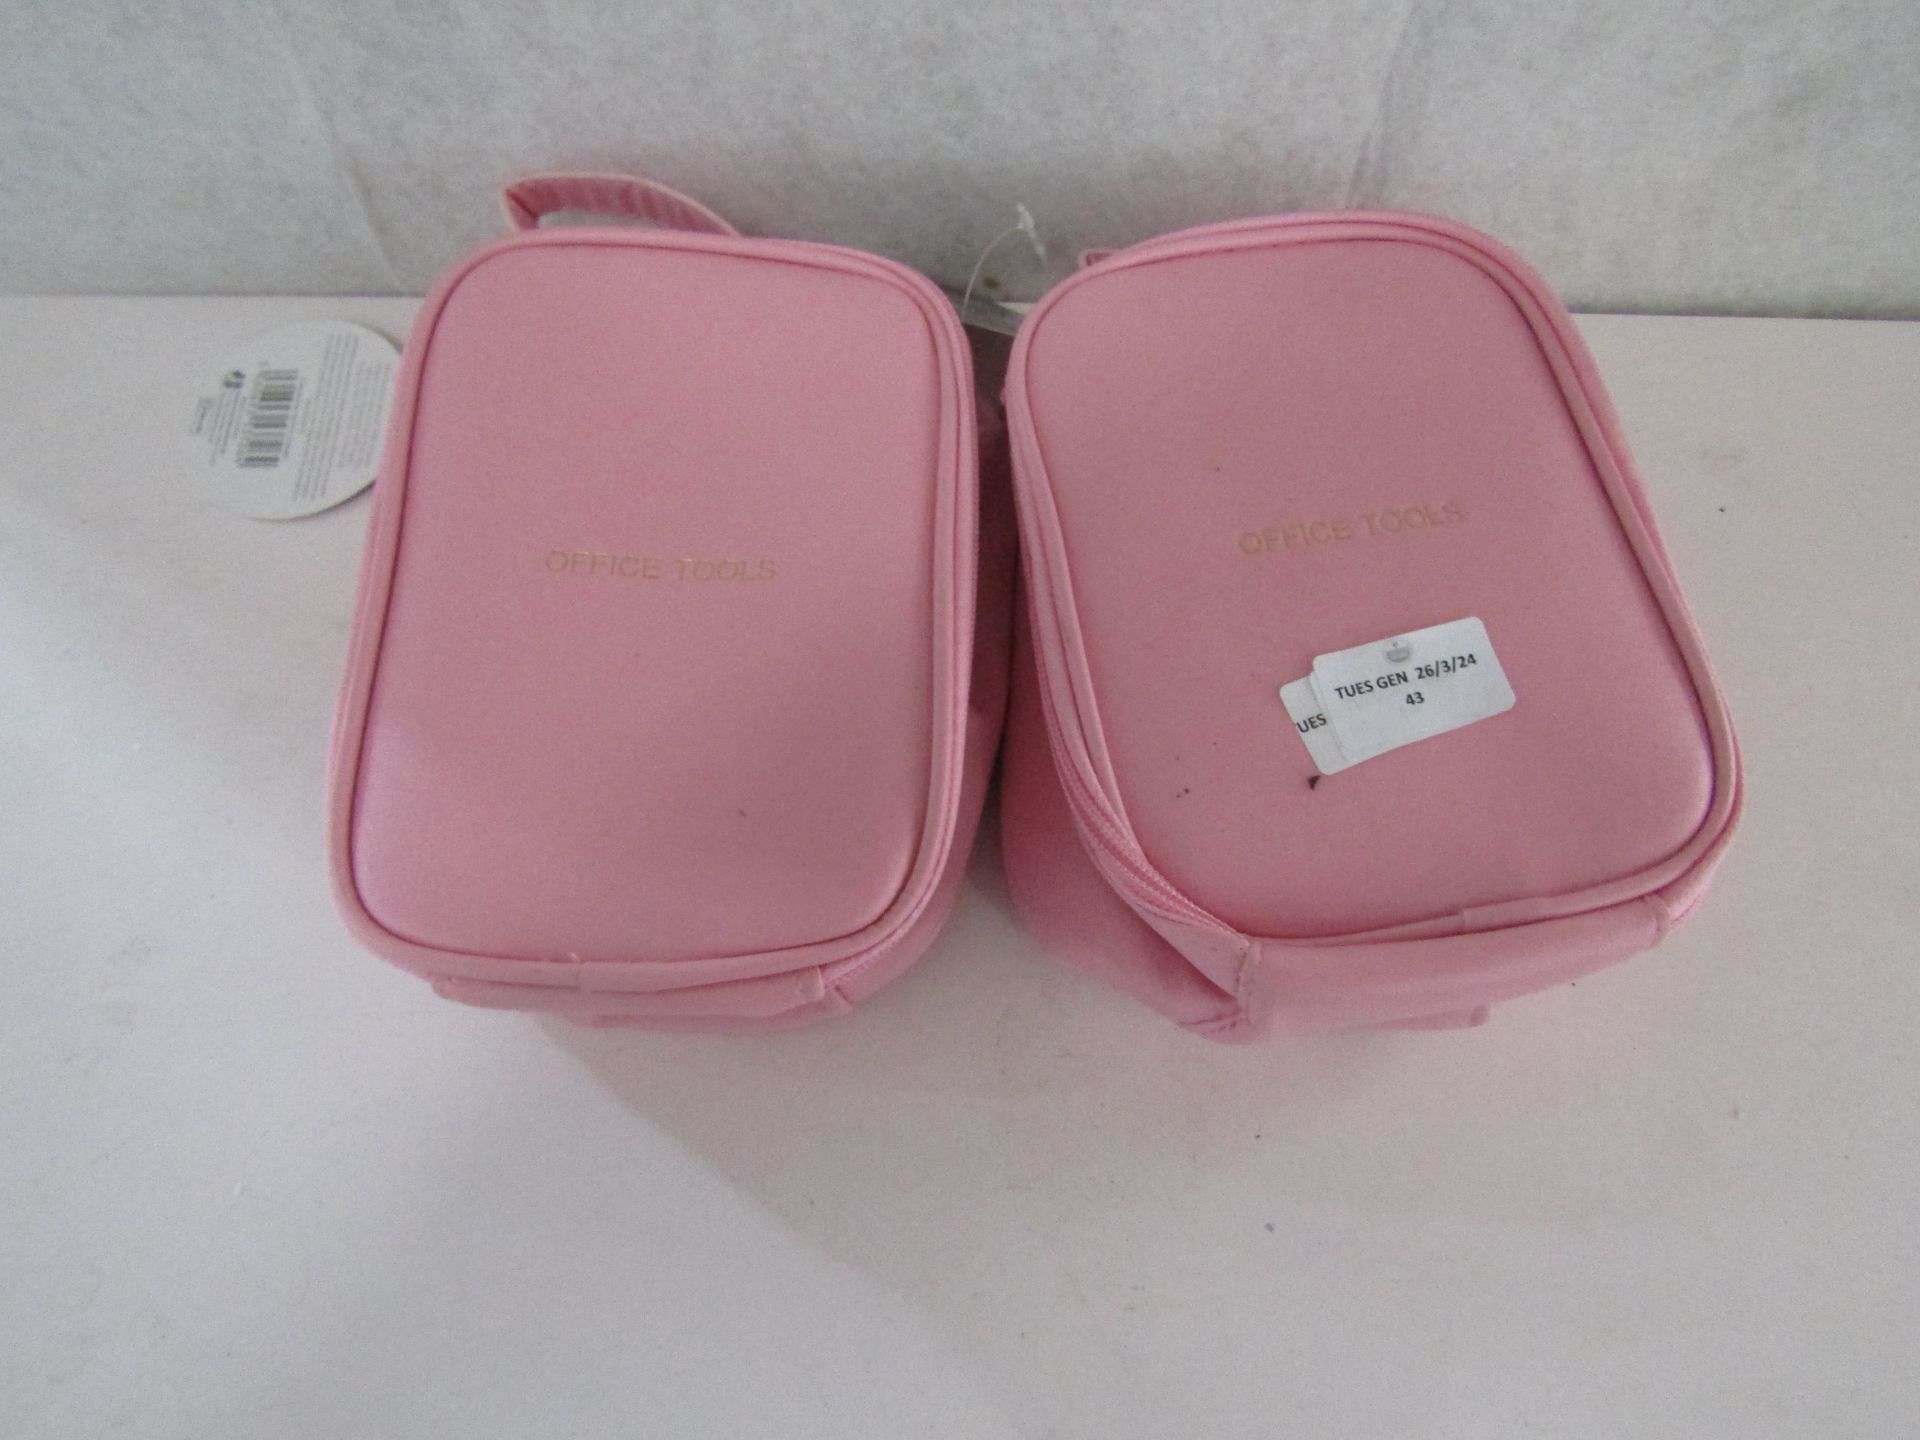 2x Pink Faux Leather Office Tools 12-Piece Kits - New With Tags.